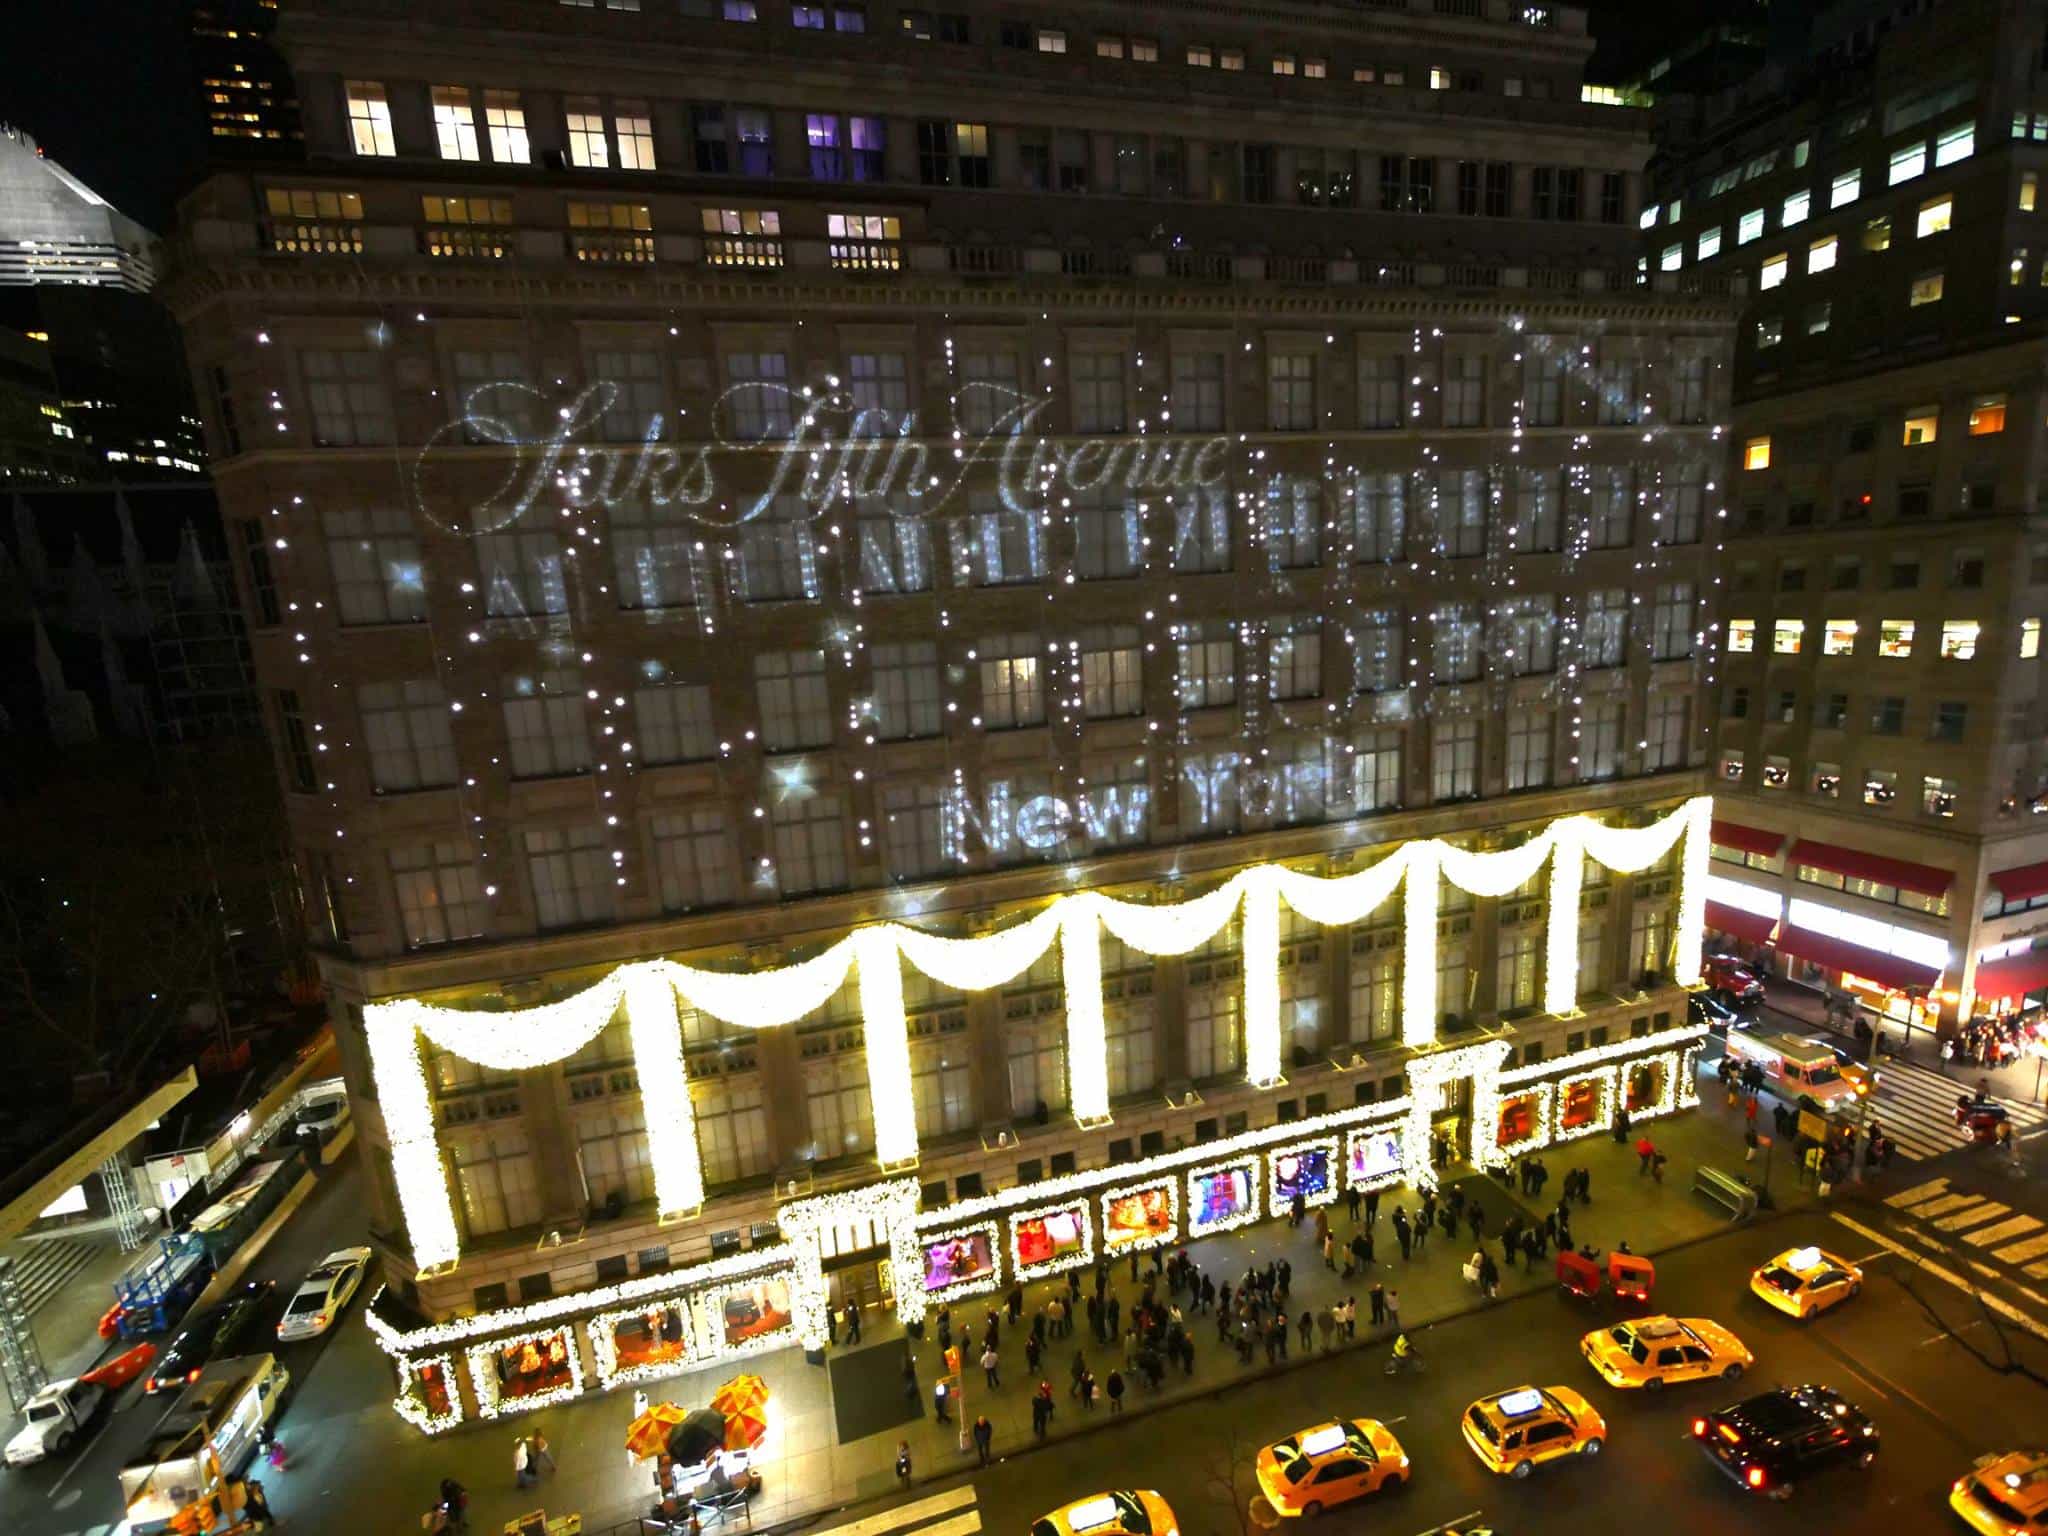 Saks 5th Avenue Holiday Projection Mapping Event. Pixel